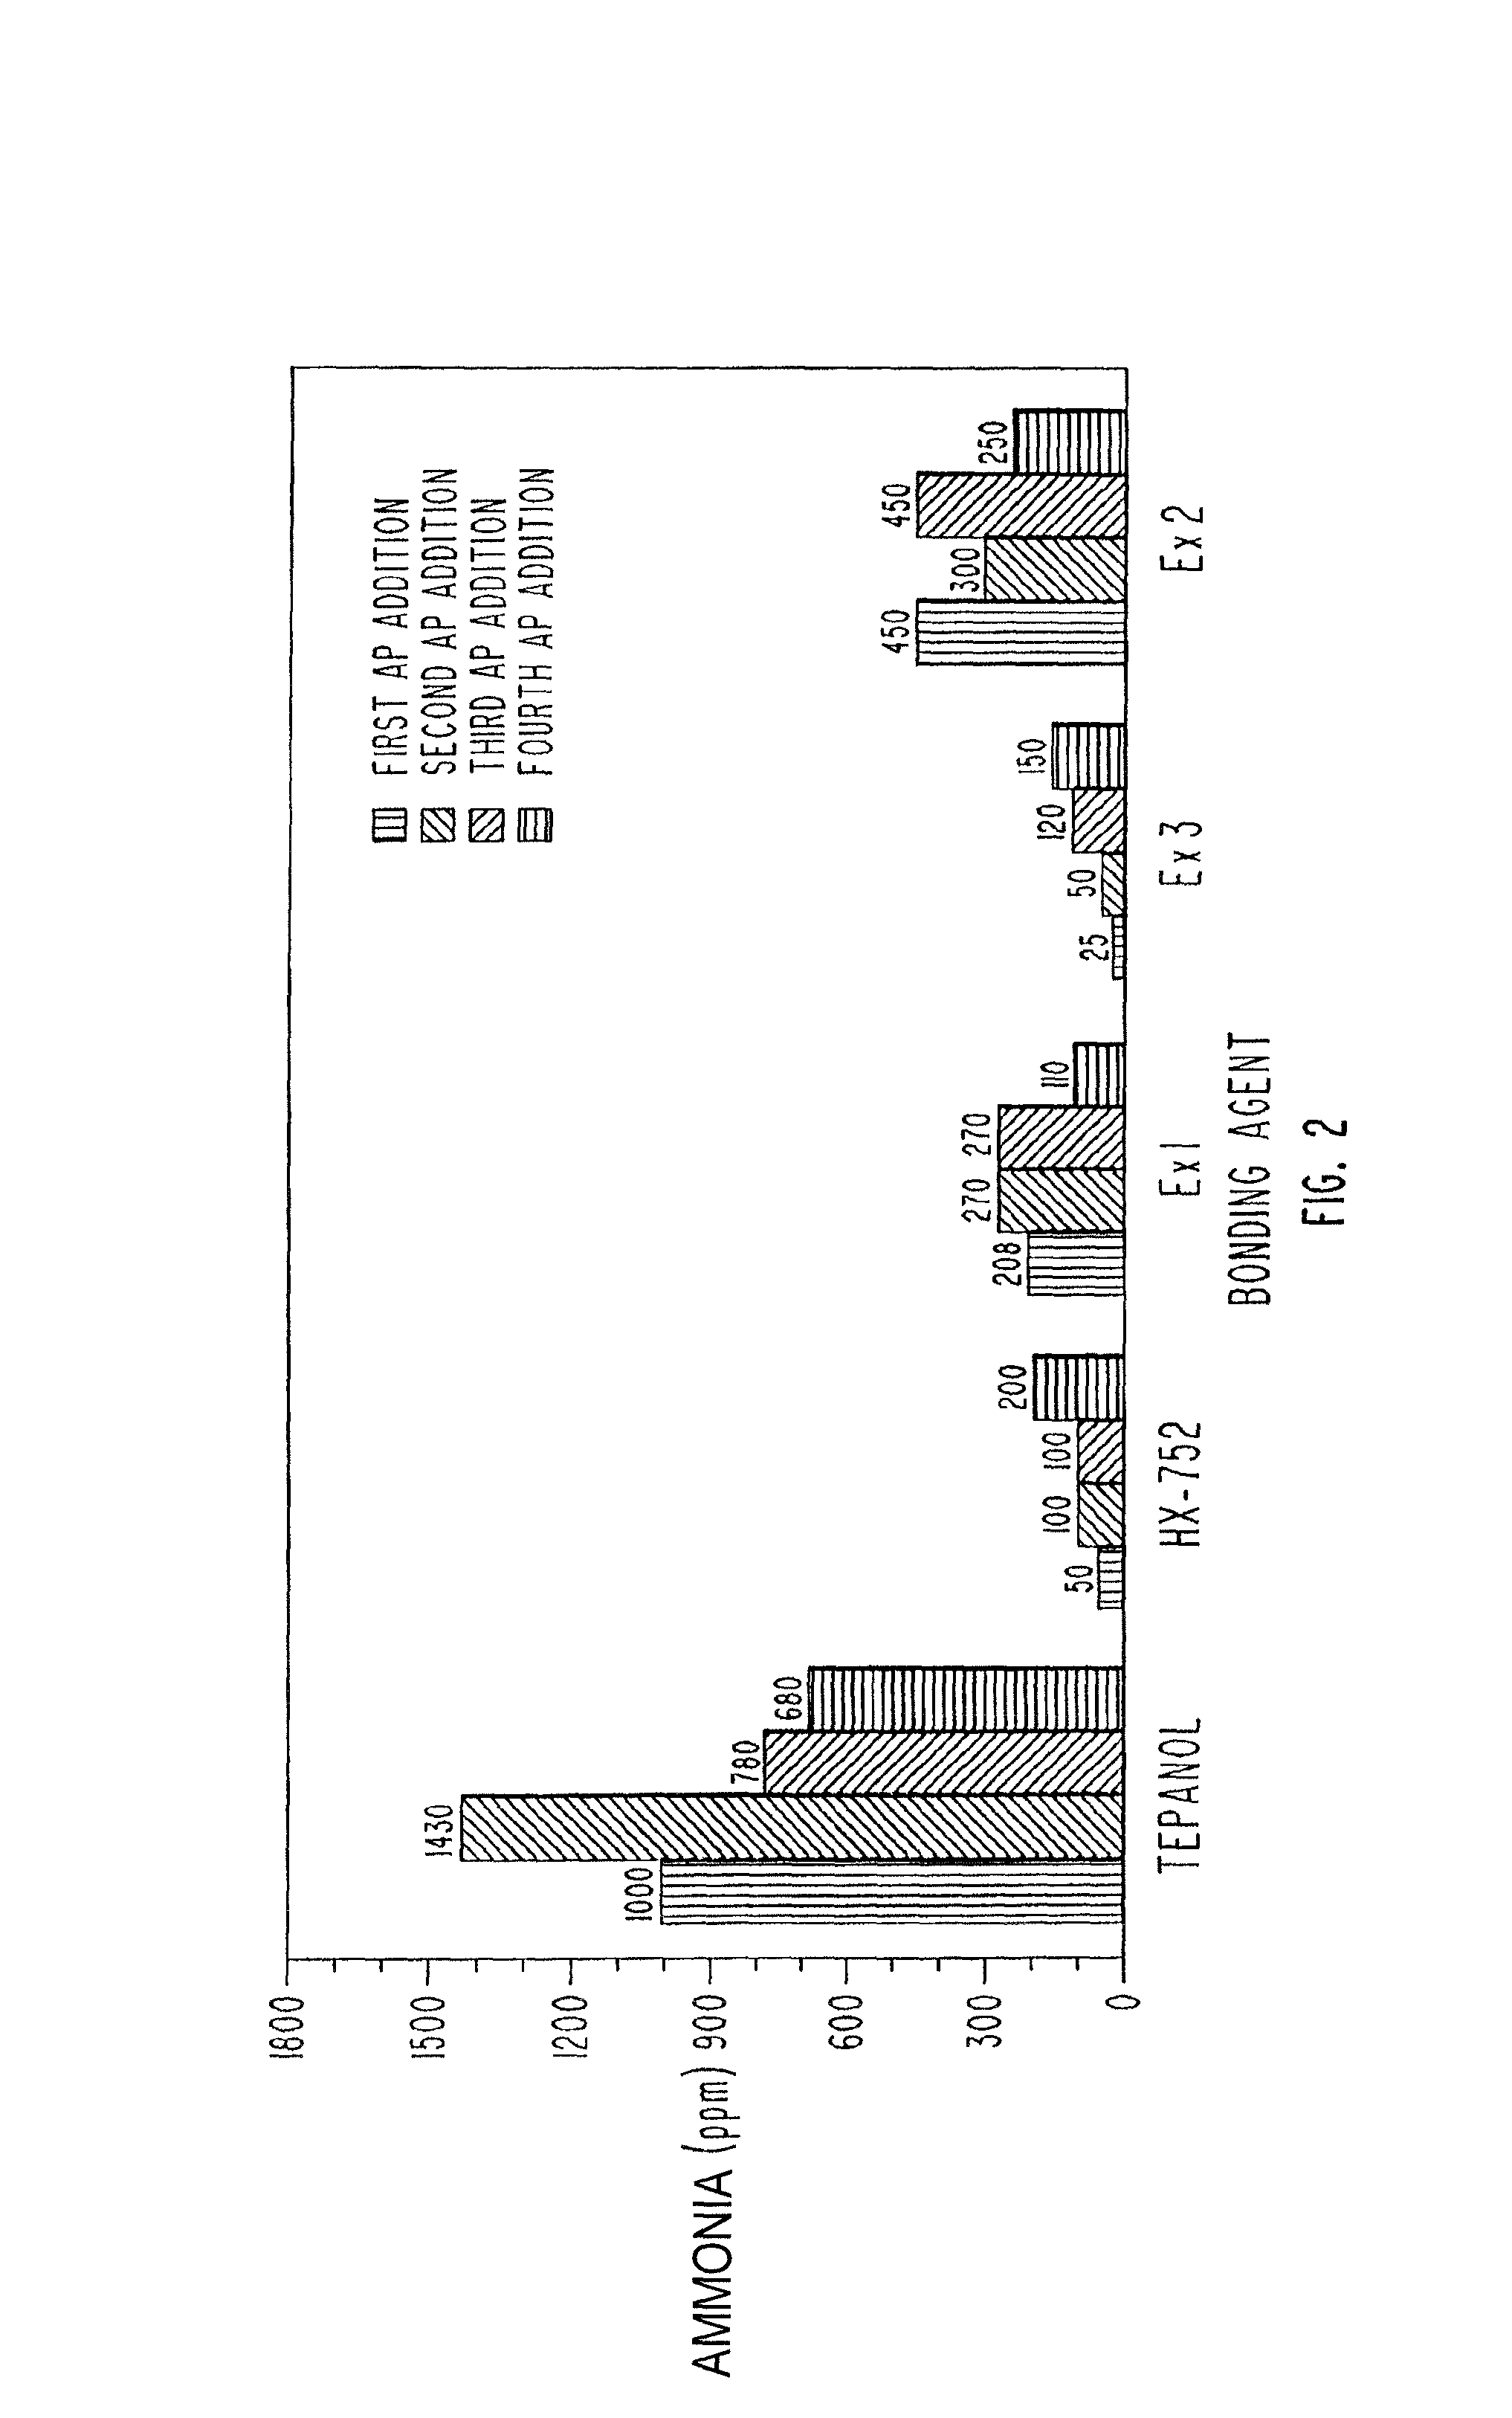 Solid propellant bonding agents and methods for their use